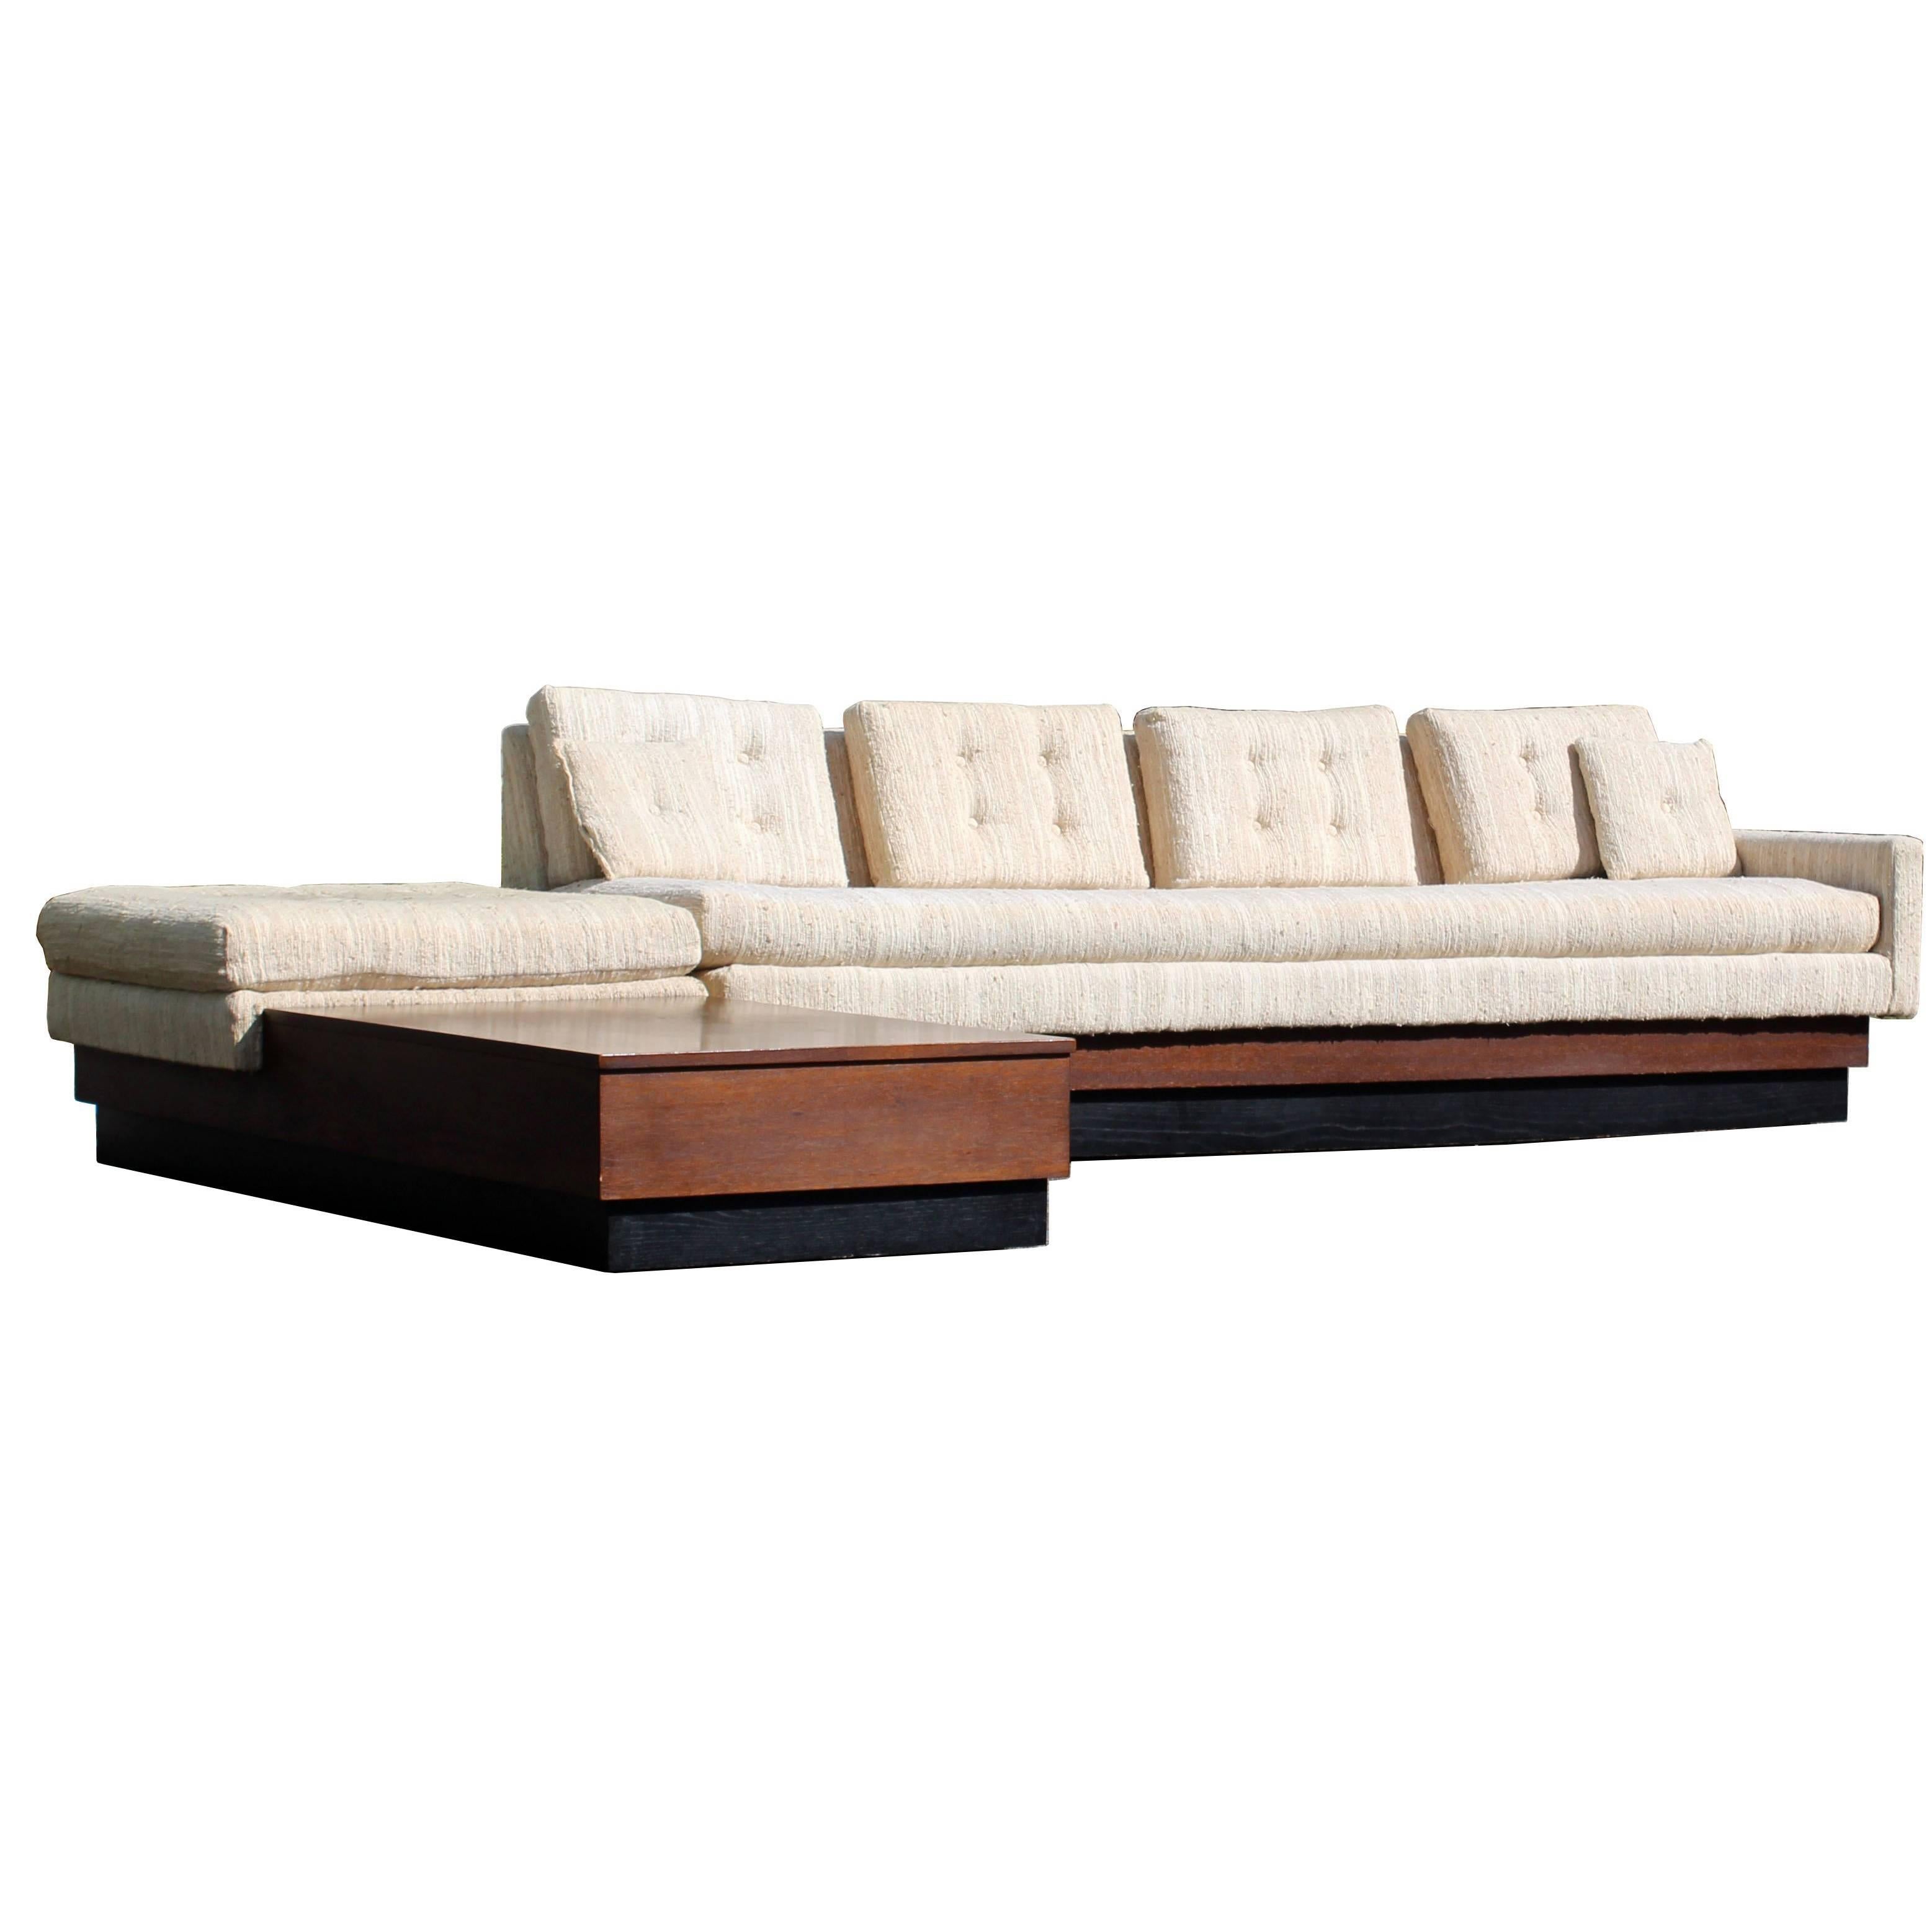 Mid-Century Modern Two-Piece Sofa Black Plinth Base Pearsall Attributed